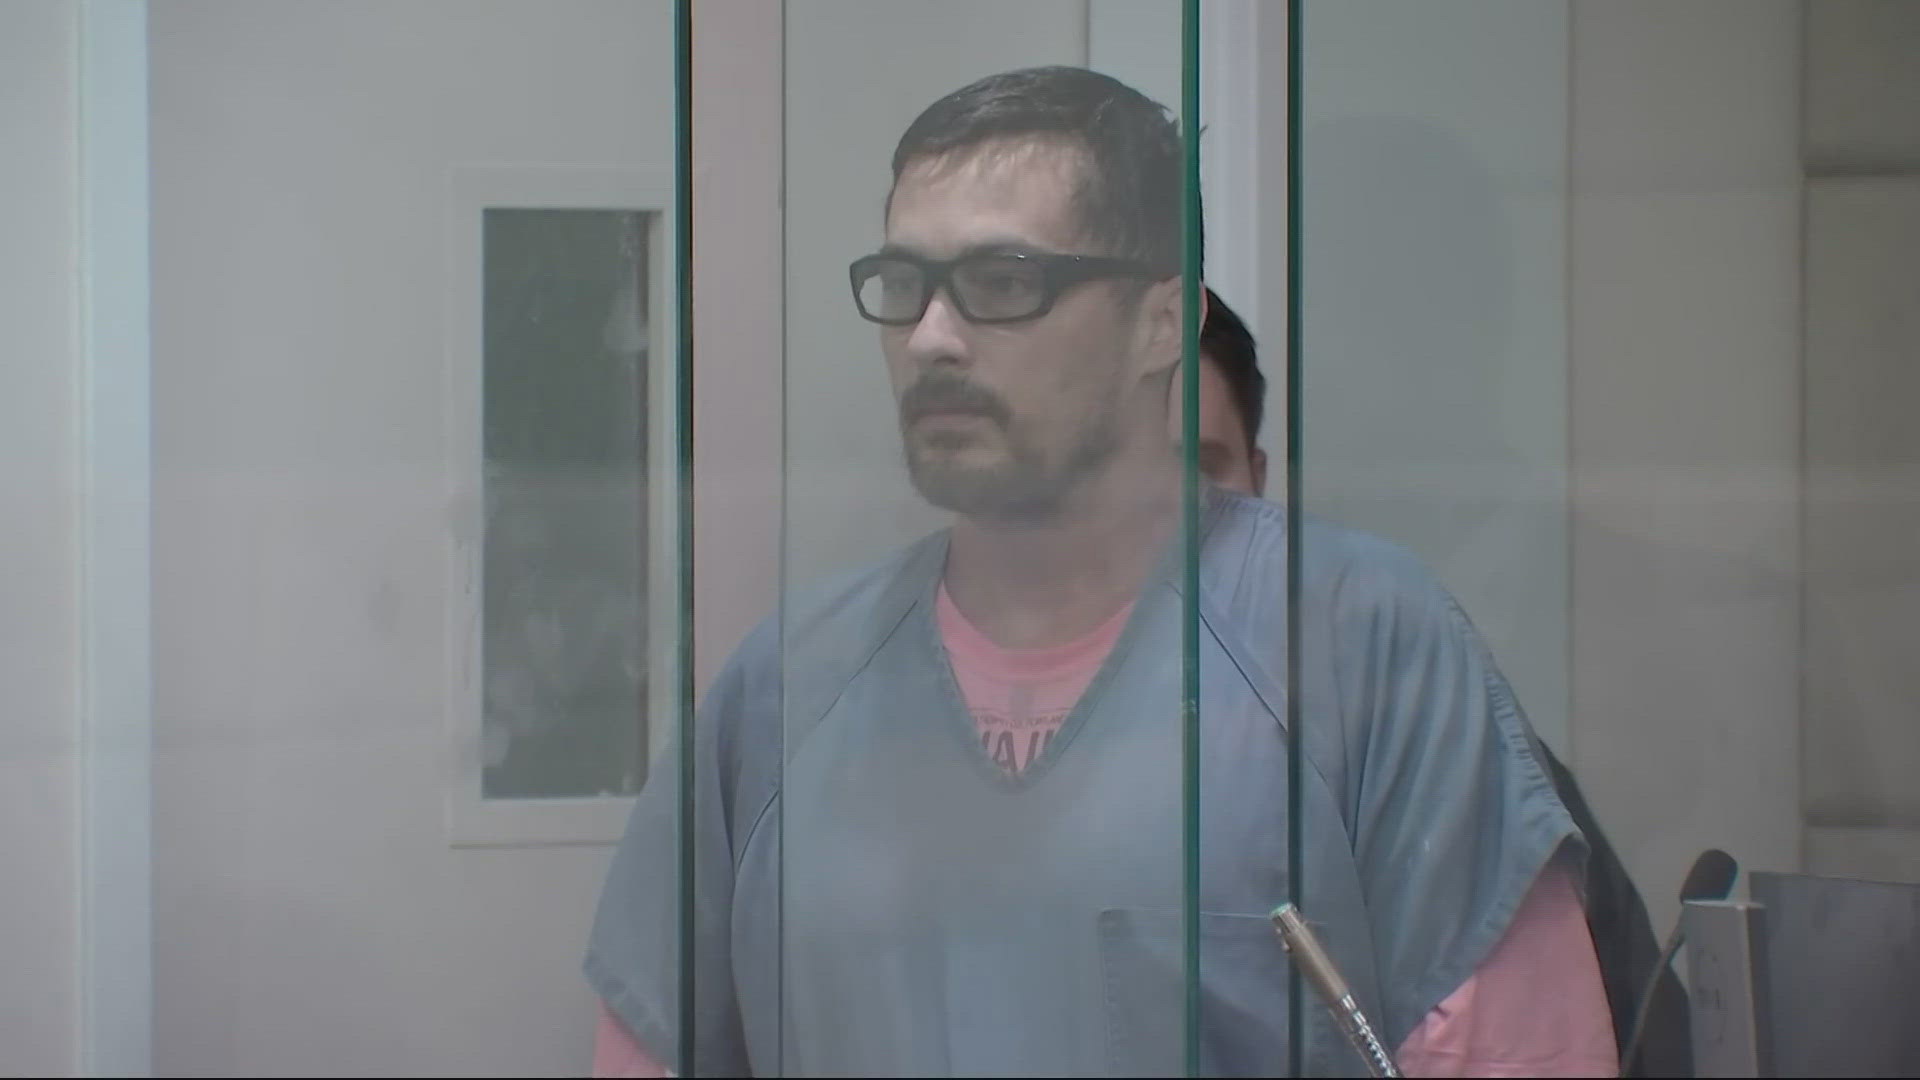 Jesse Calhoun pleaded not guilty Thursday for the murder of three Oregon women whose bodies were found around the Portland metro area.